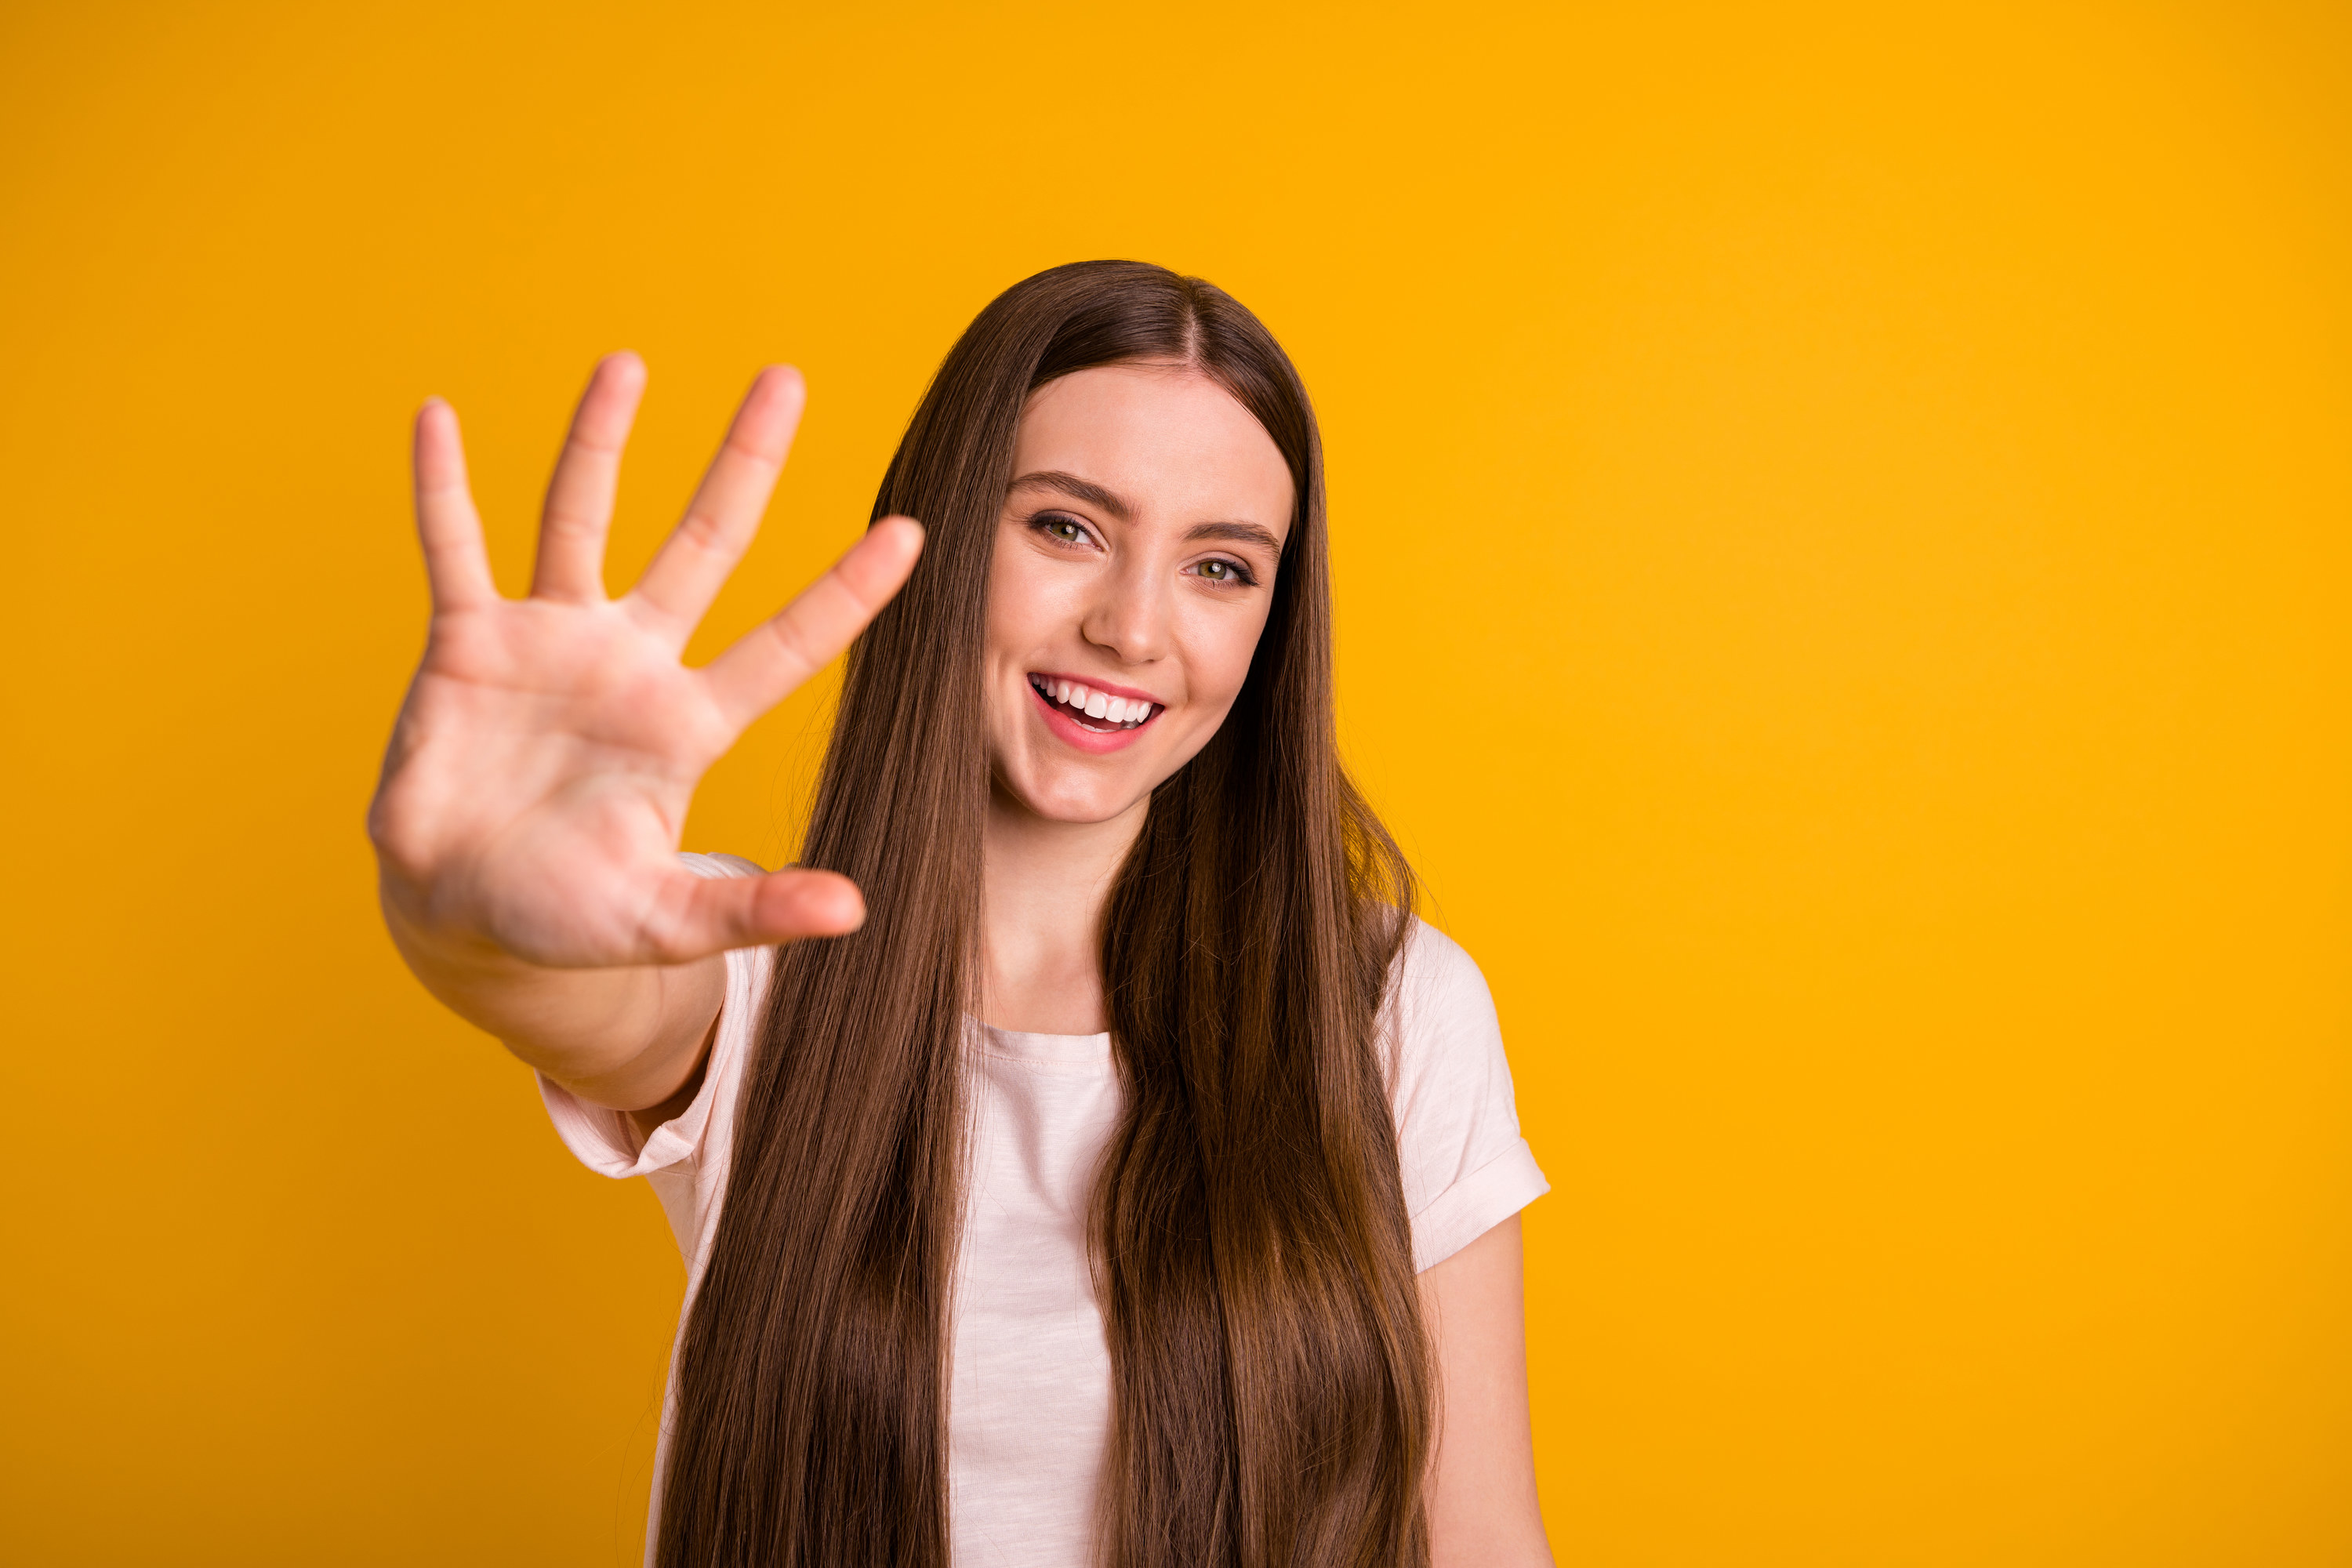 A woman stands against a yellow background and holds up her hand